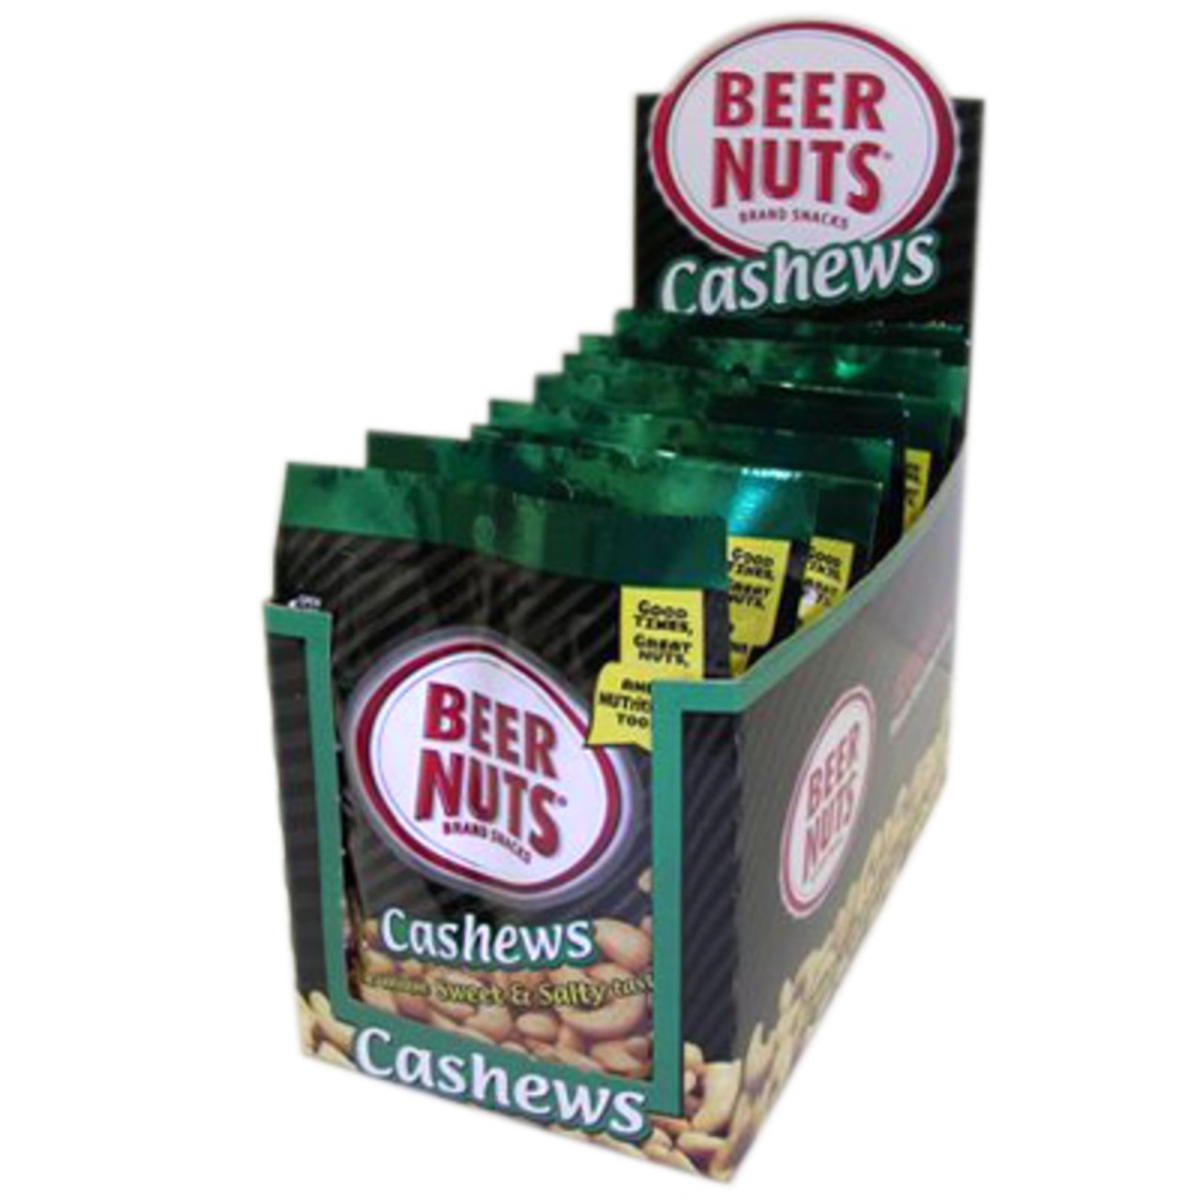 Picture of Distributed Consumables N94 2 oz Beer Nuts Cashews Counter Display